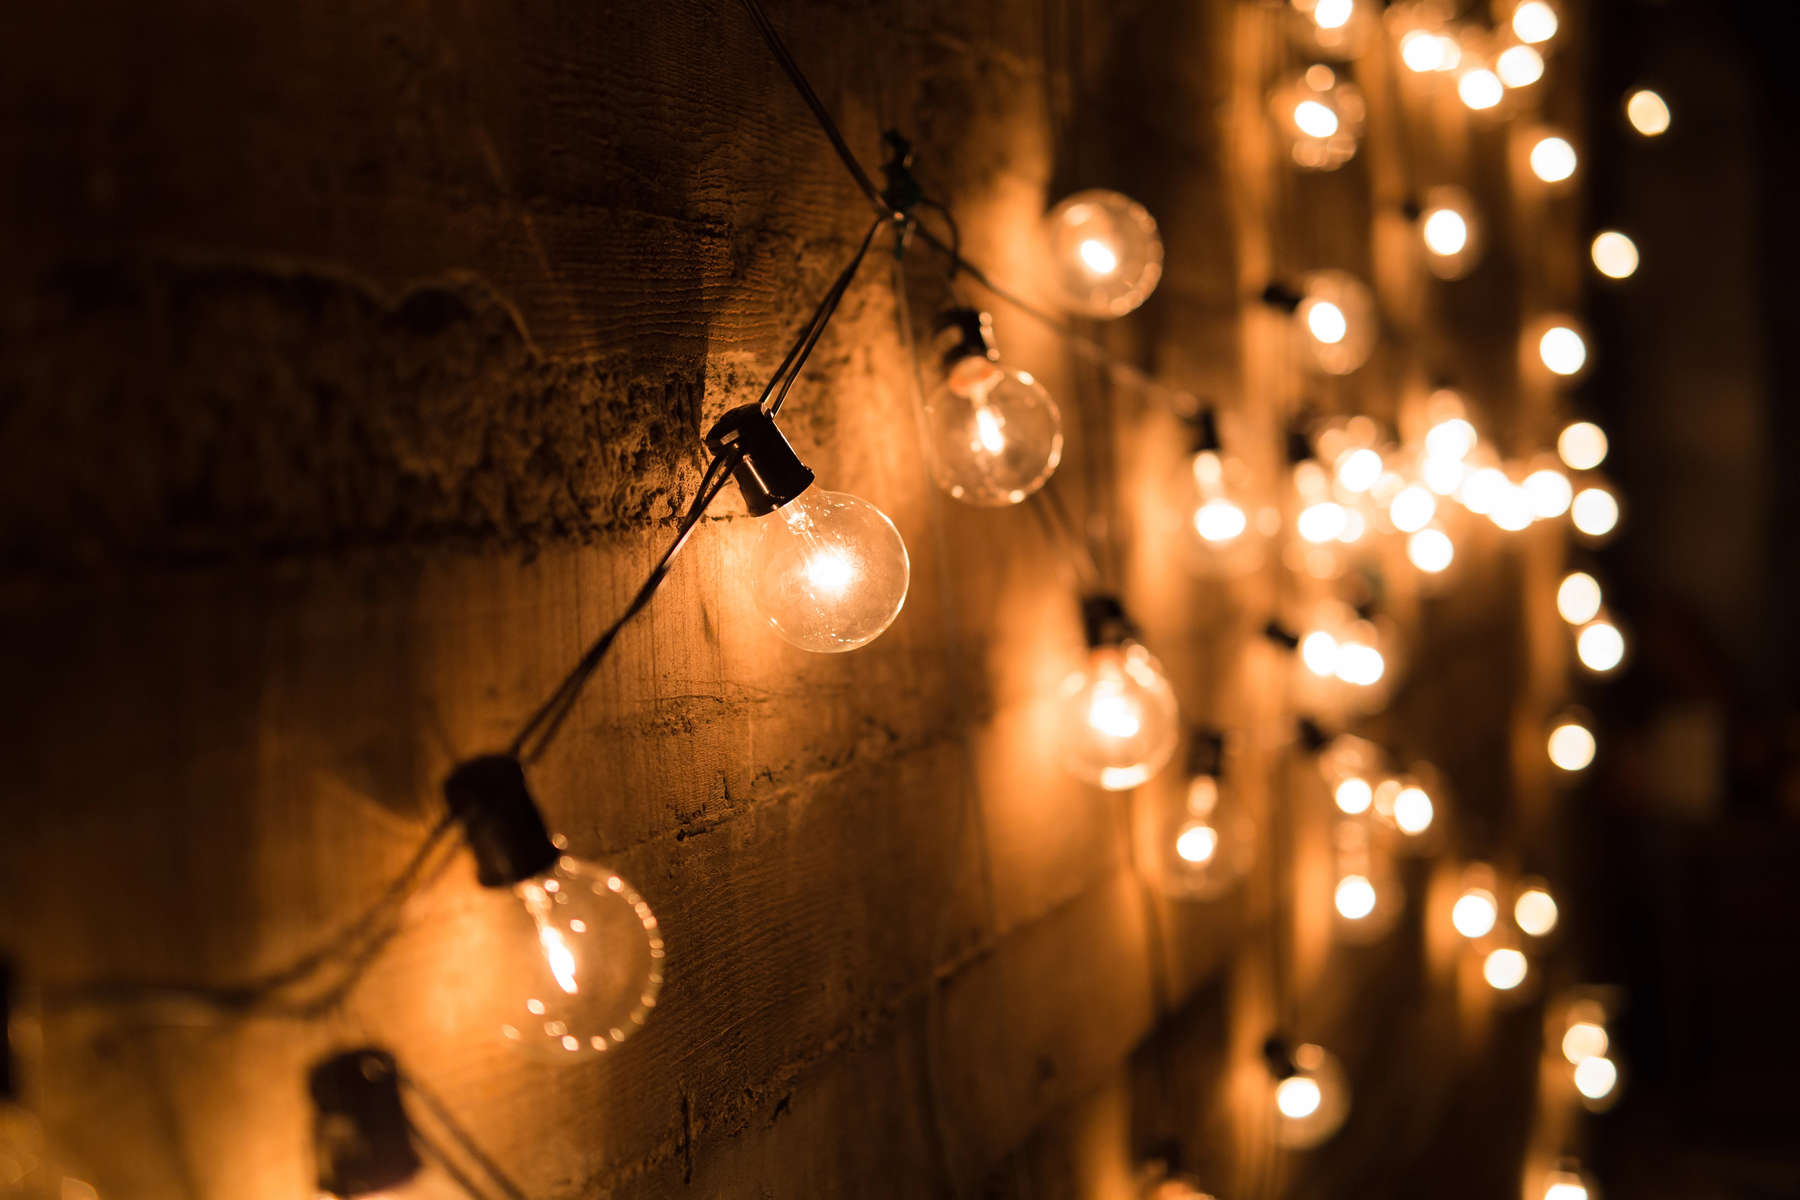 String of vintage light bulbs against a concrete wall with shall